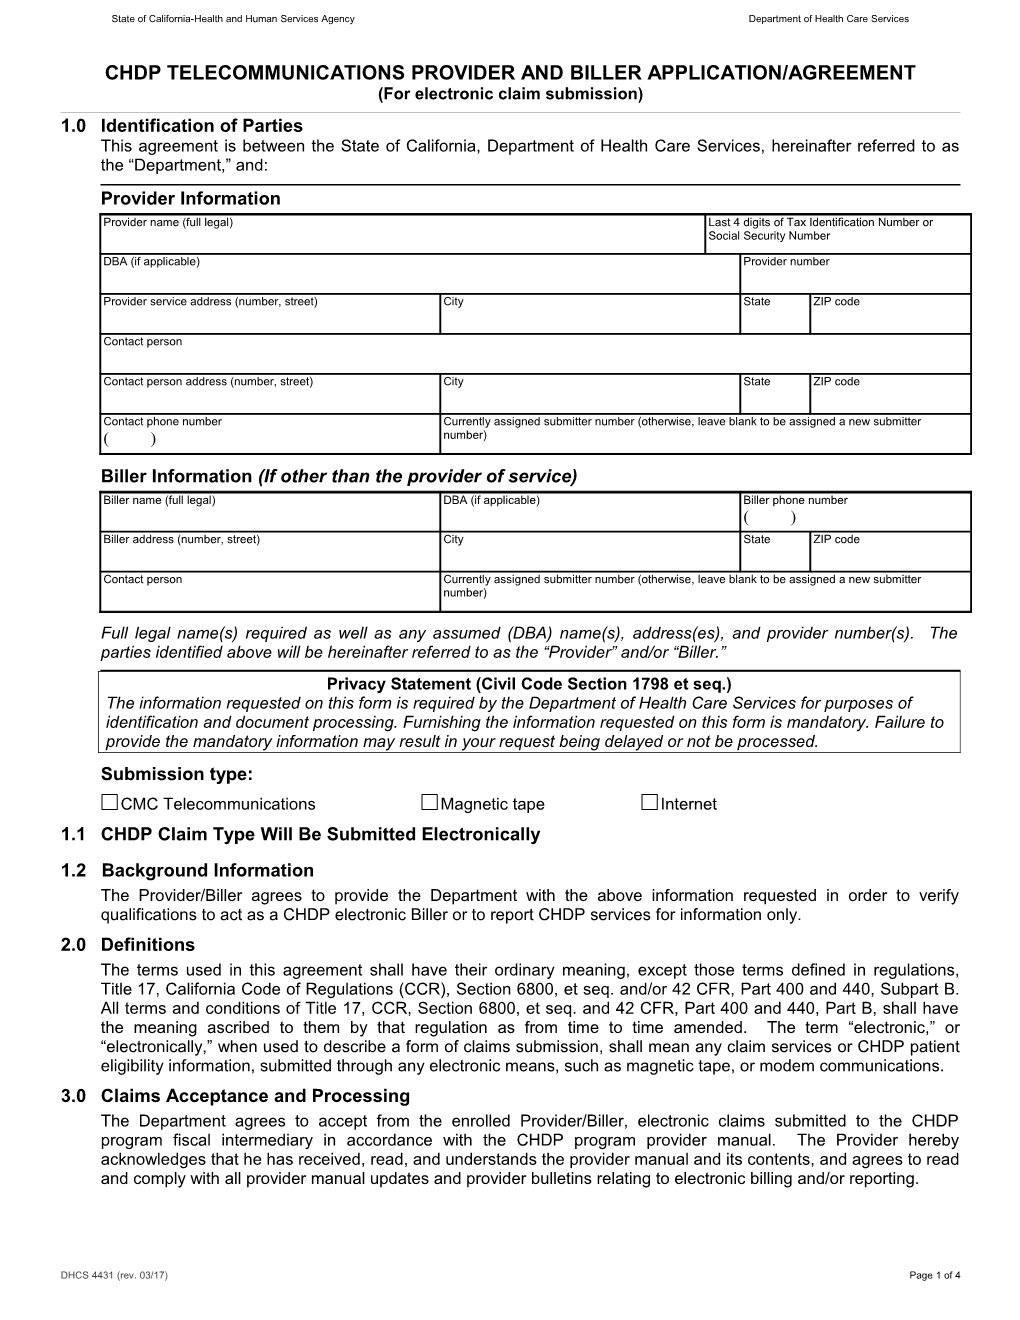 Form: CHDP Telecommunications Provider and Biller Application/Agreement (Cmc Enroll Frm4431)